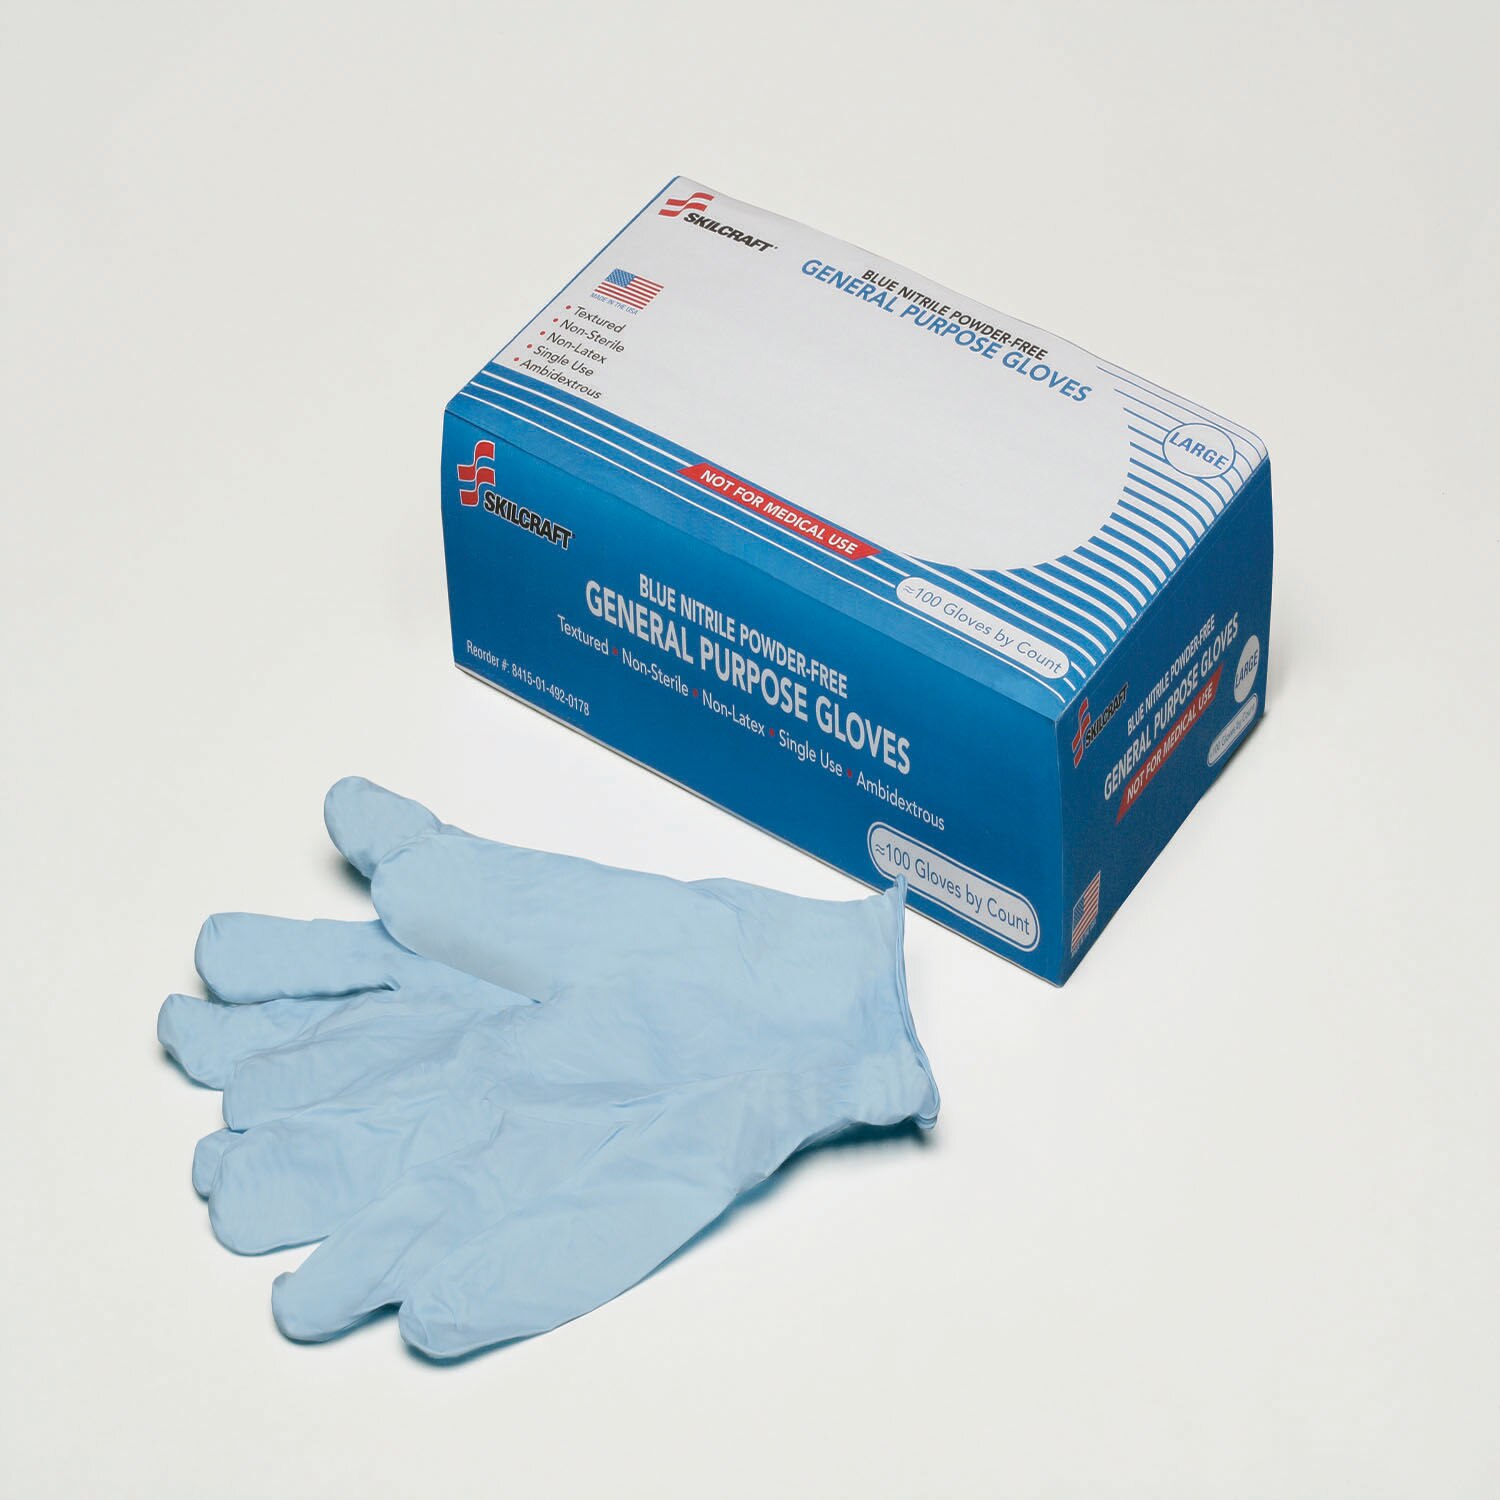 Gloves, Disposable, Powder-Free, Latex-Free, Nitrile, Industrial-Grade, Small